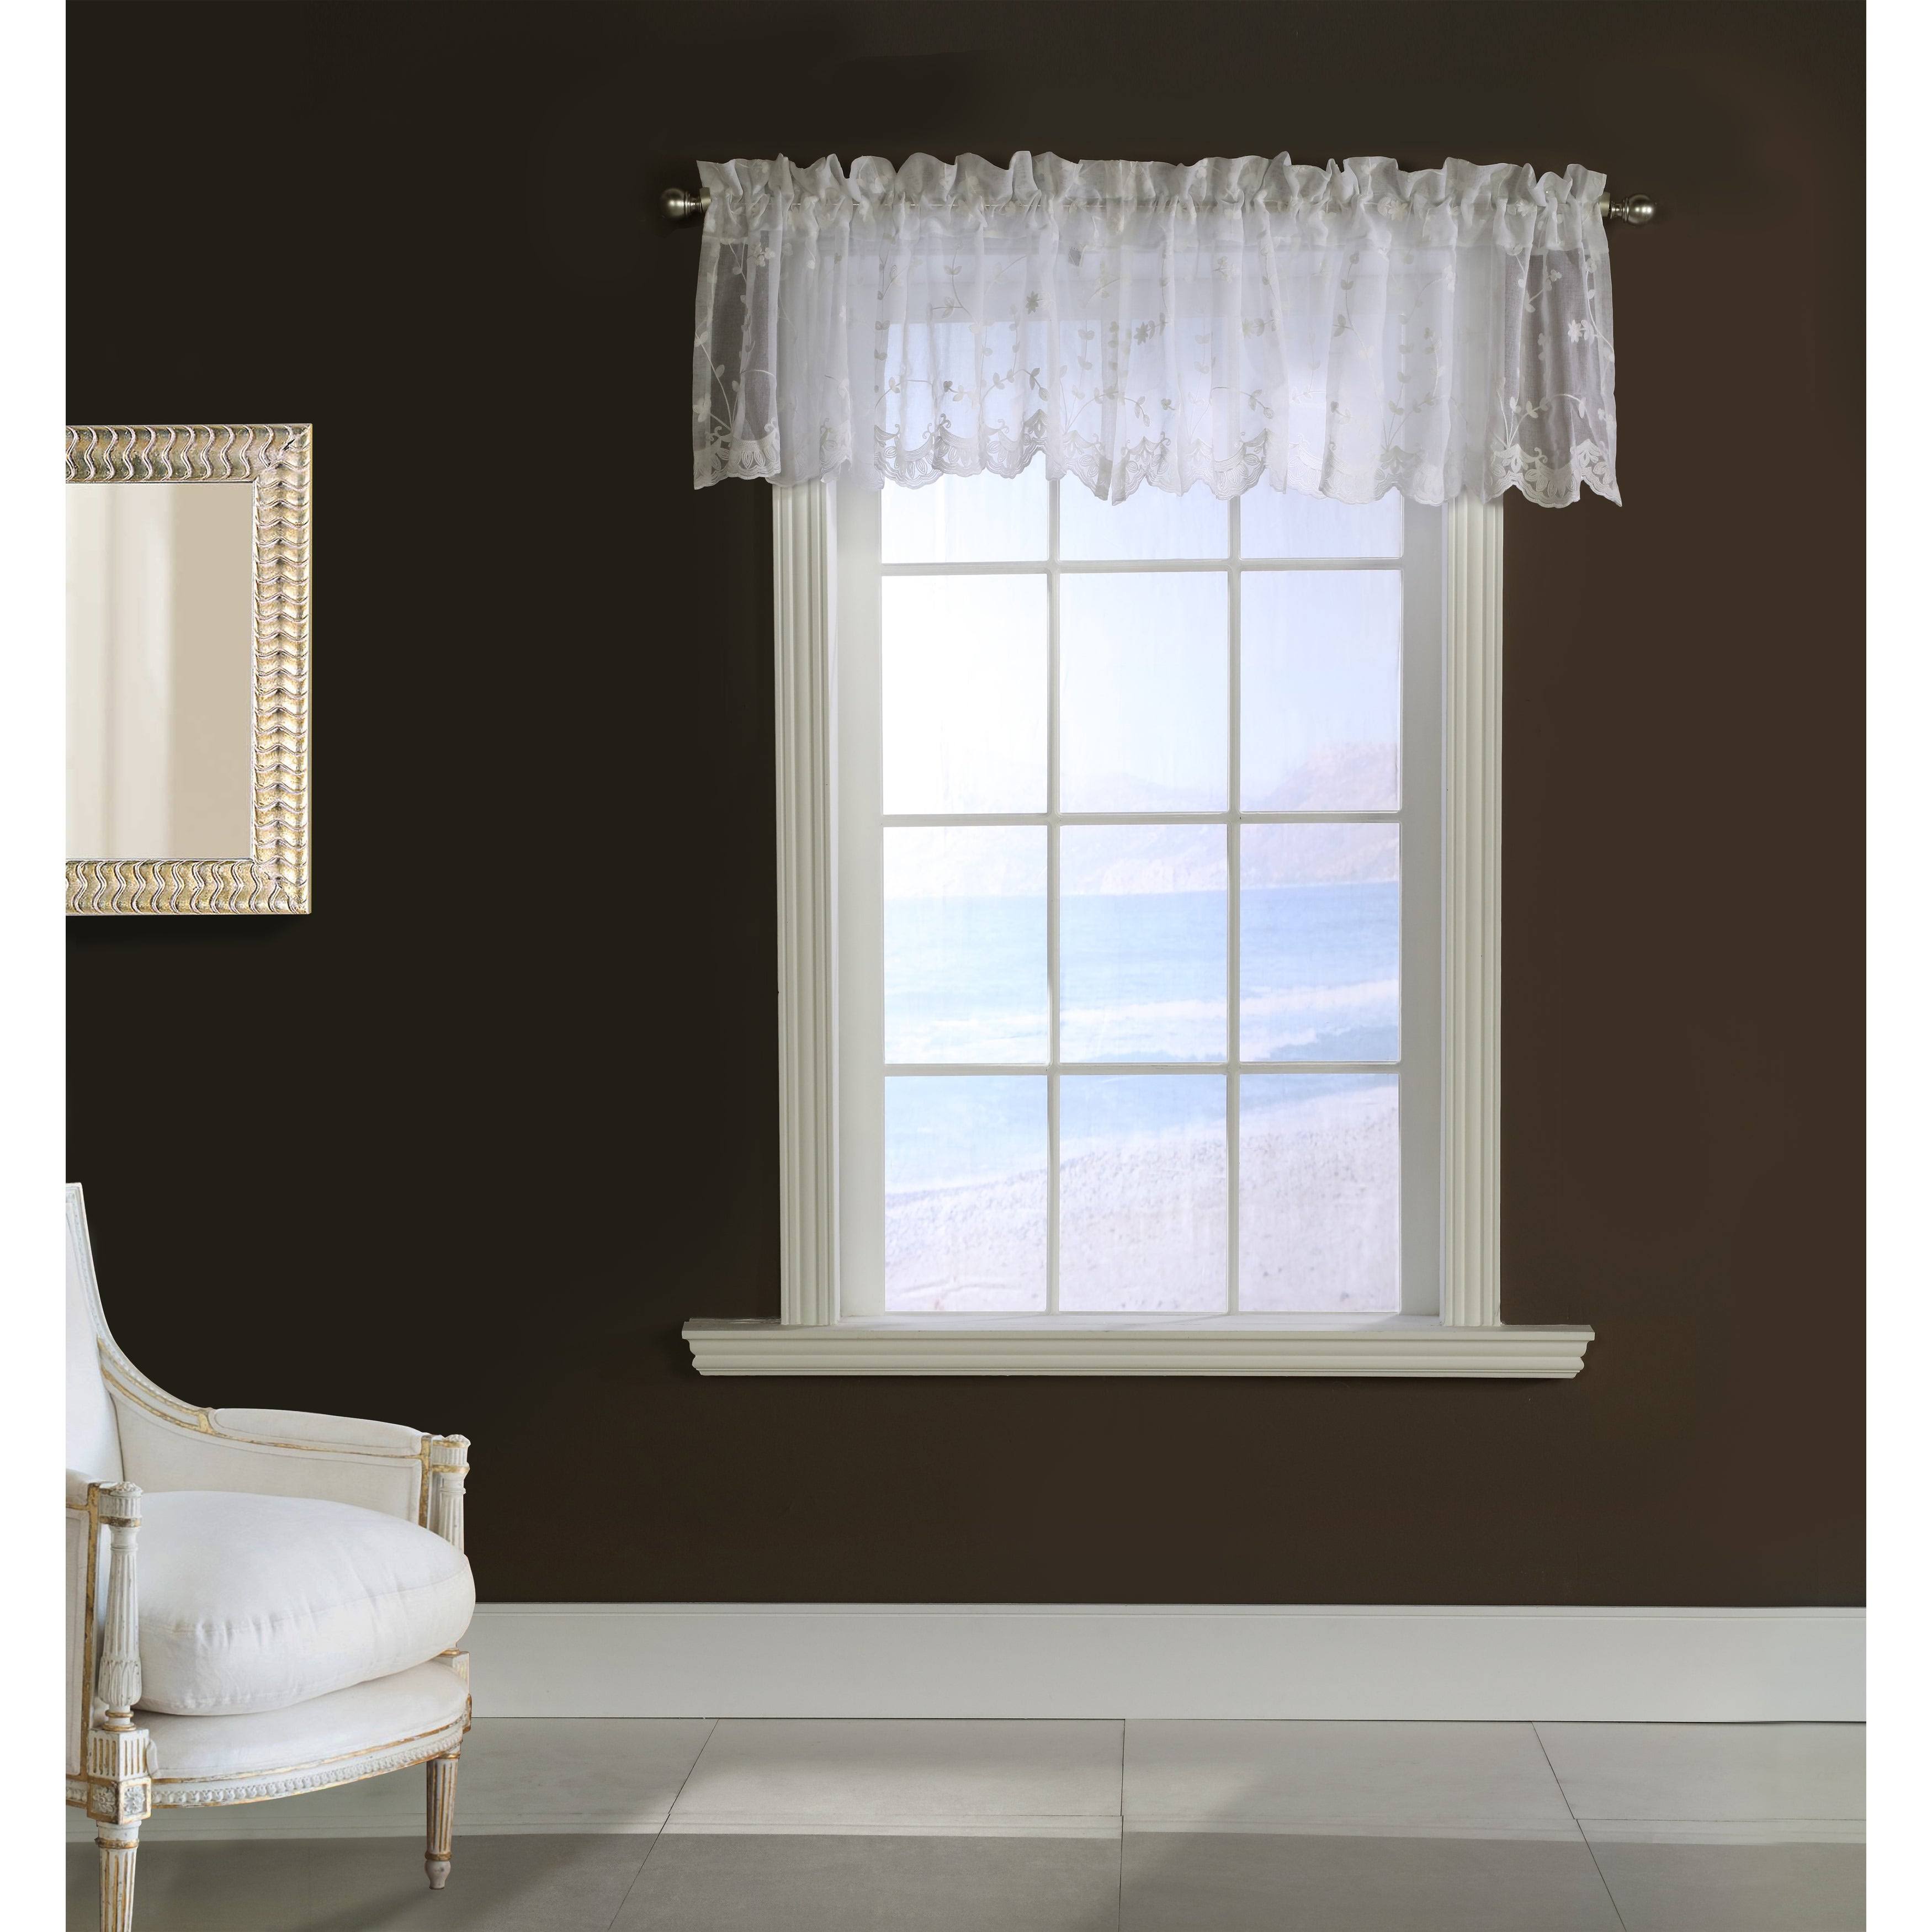 Commonwealth Grandeur 43cm Pole Top Valance in White | Nursery | Delivery guaranteed | Best Price Guarantee | 30 Day Money Back Guarantee